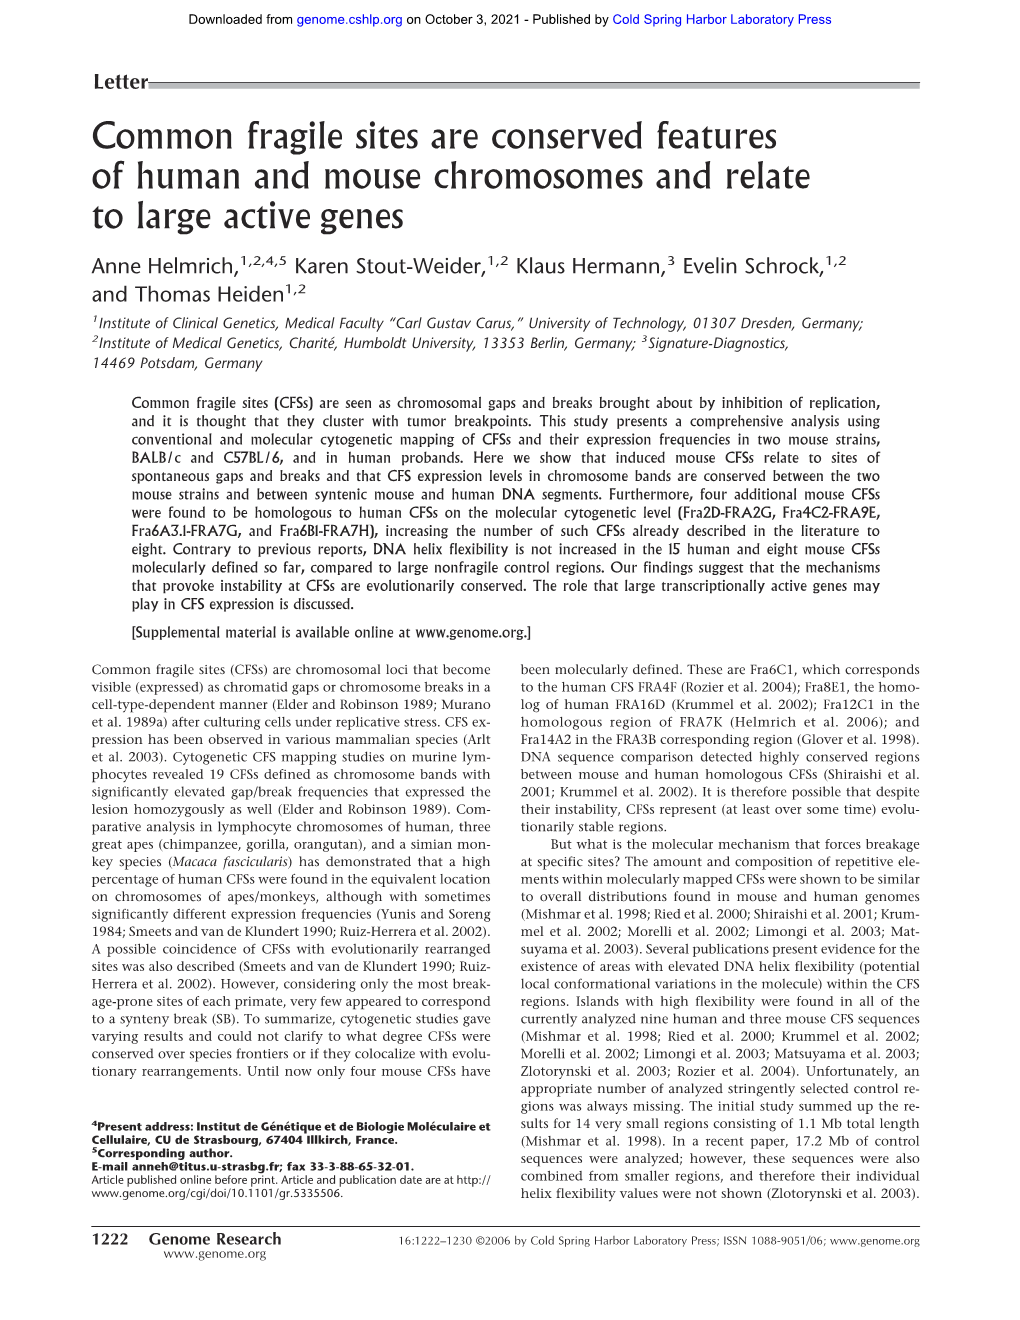 Common Fragile Sites Are Conserved Features of Human and Mouse Chromosomes and Relate to Large Active Genes